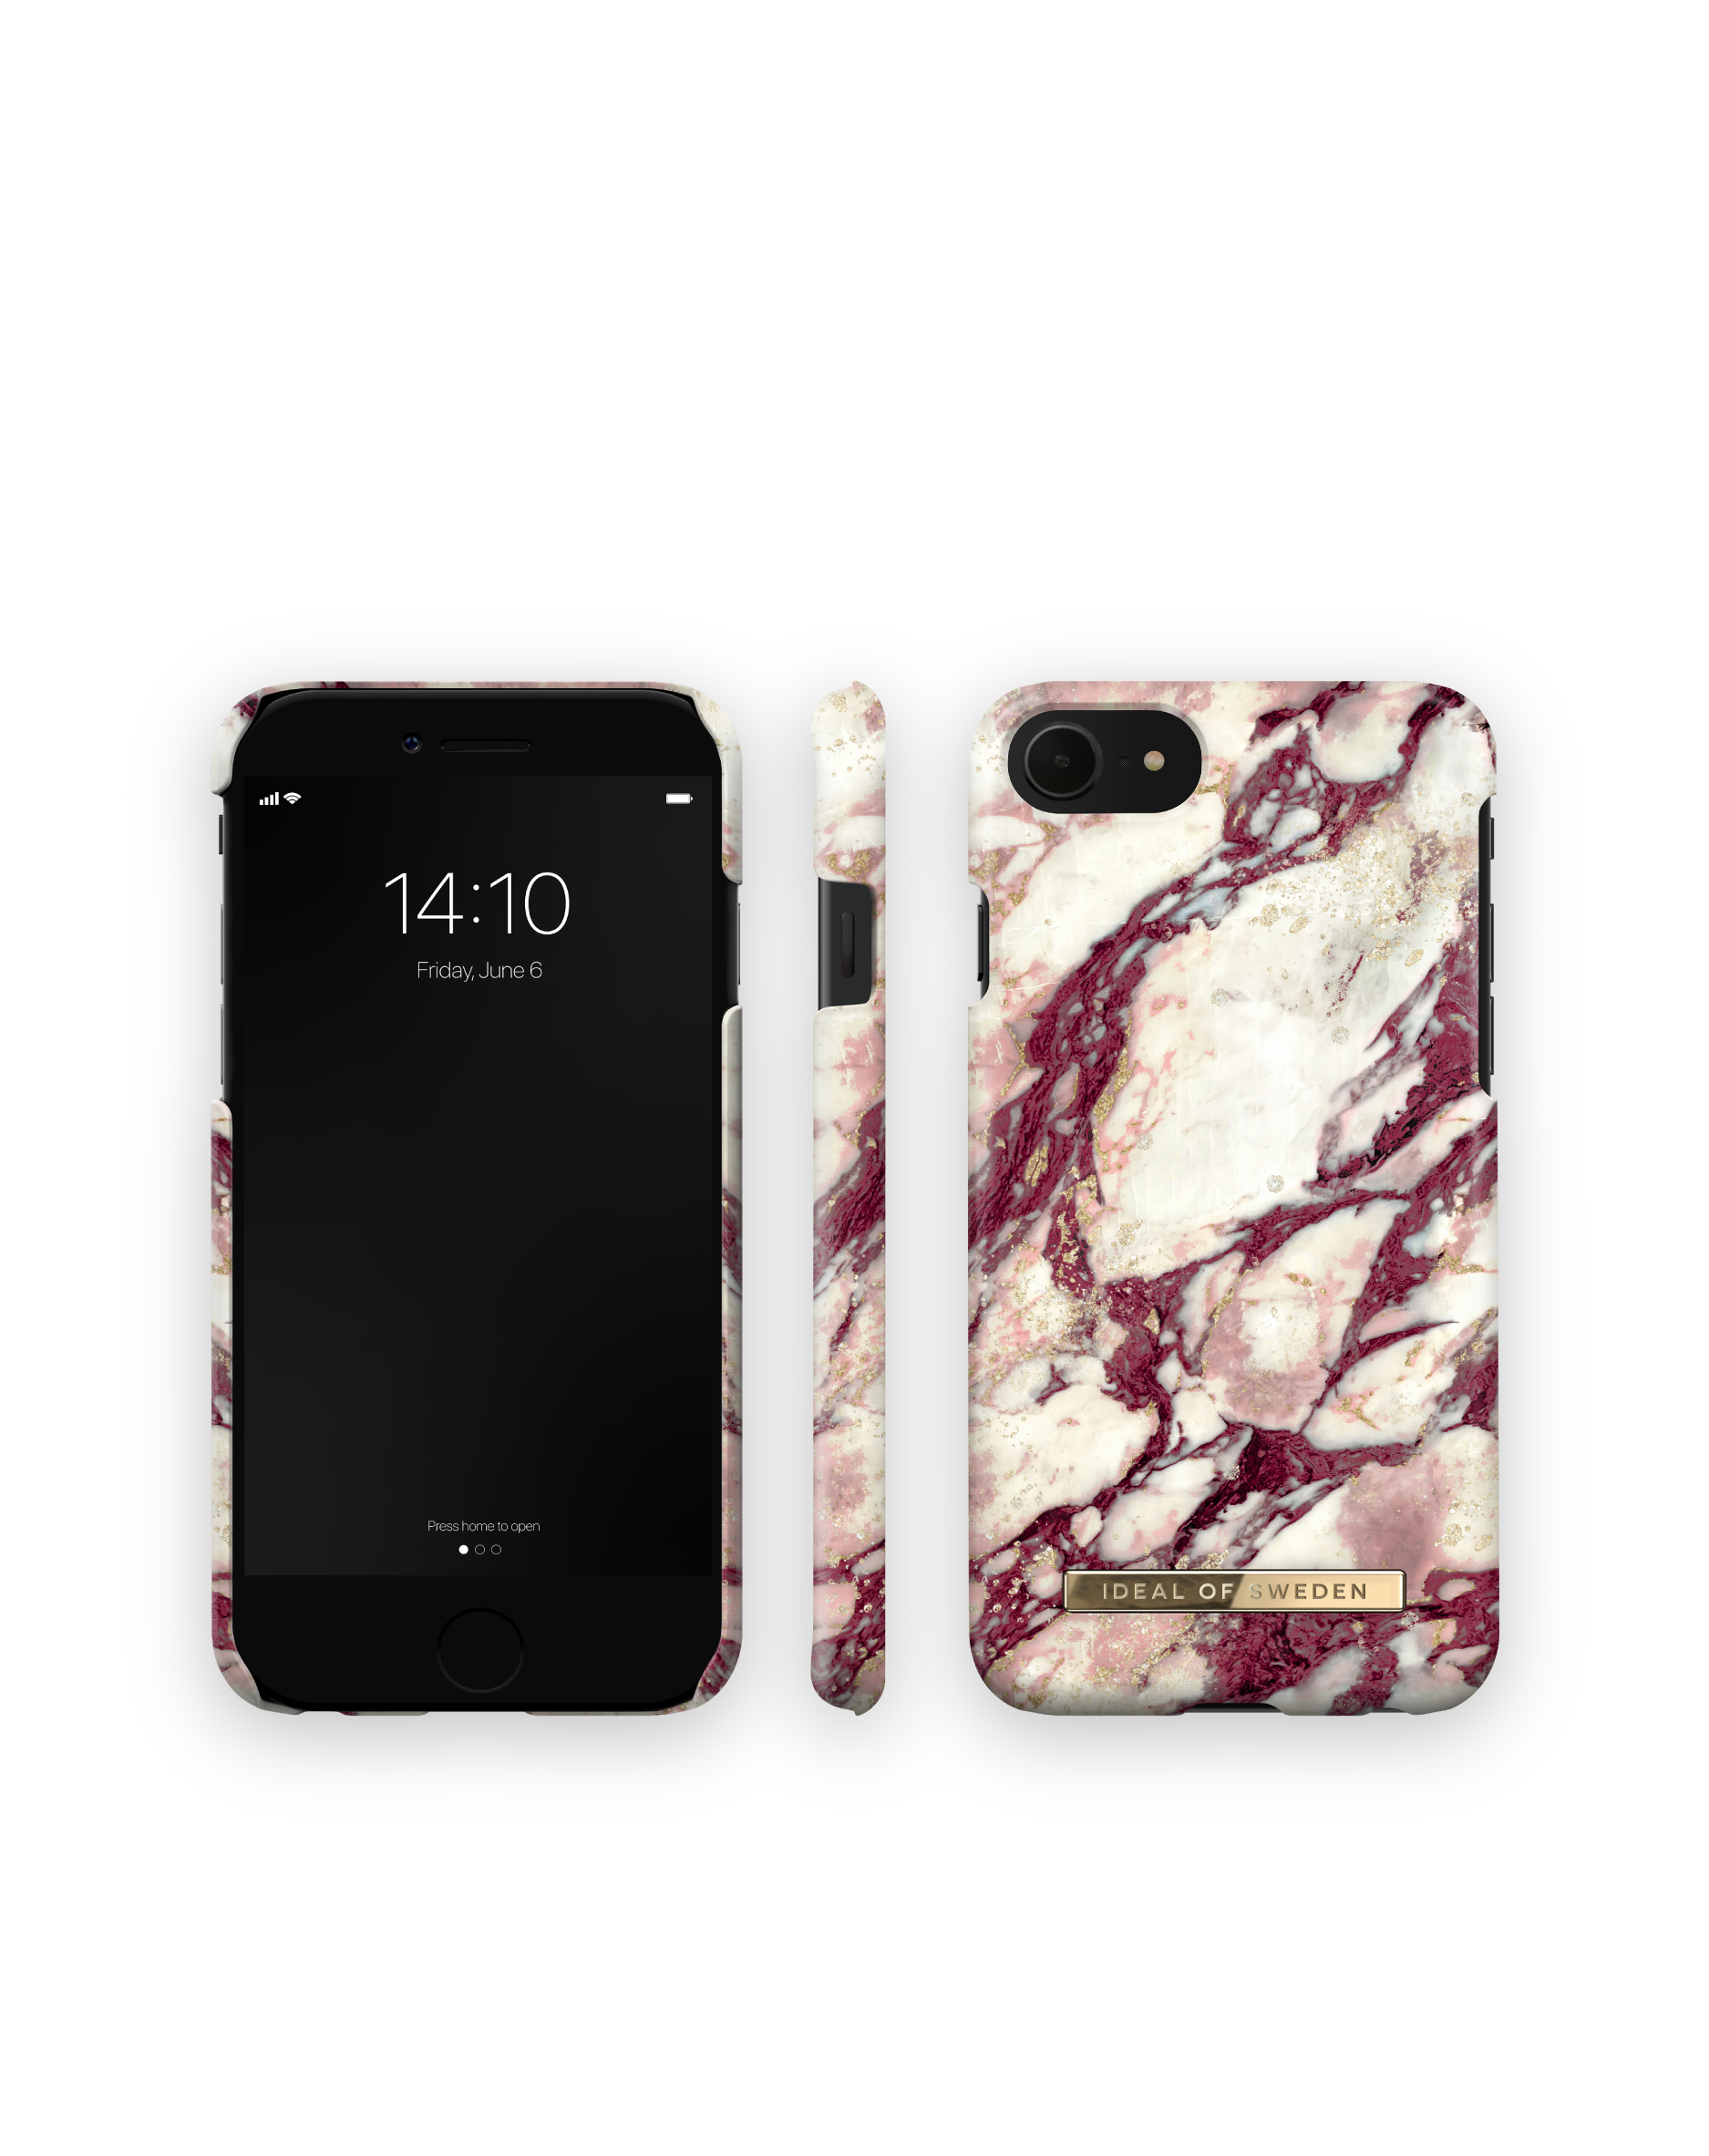 SWEDEN SE2020/SE2022/8/7/6/6s, Calacatta IDFCMR21-I7-378, Backcover, Ruby IDEAL Apple, Marble OF